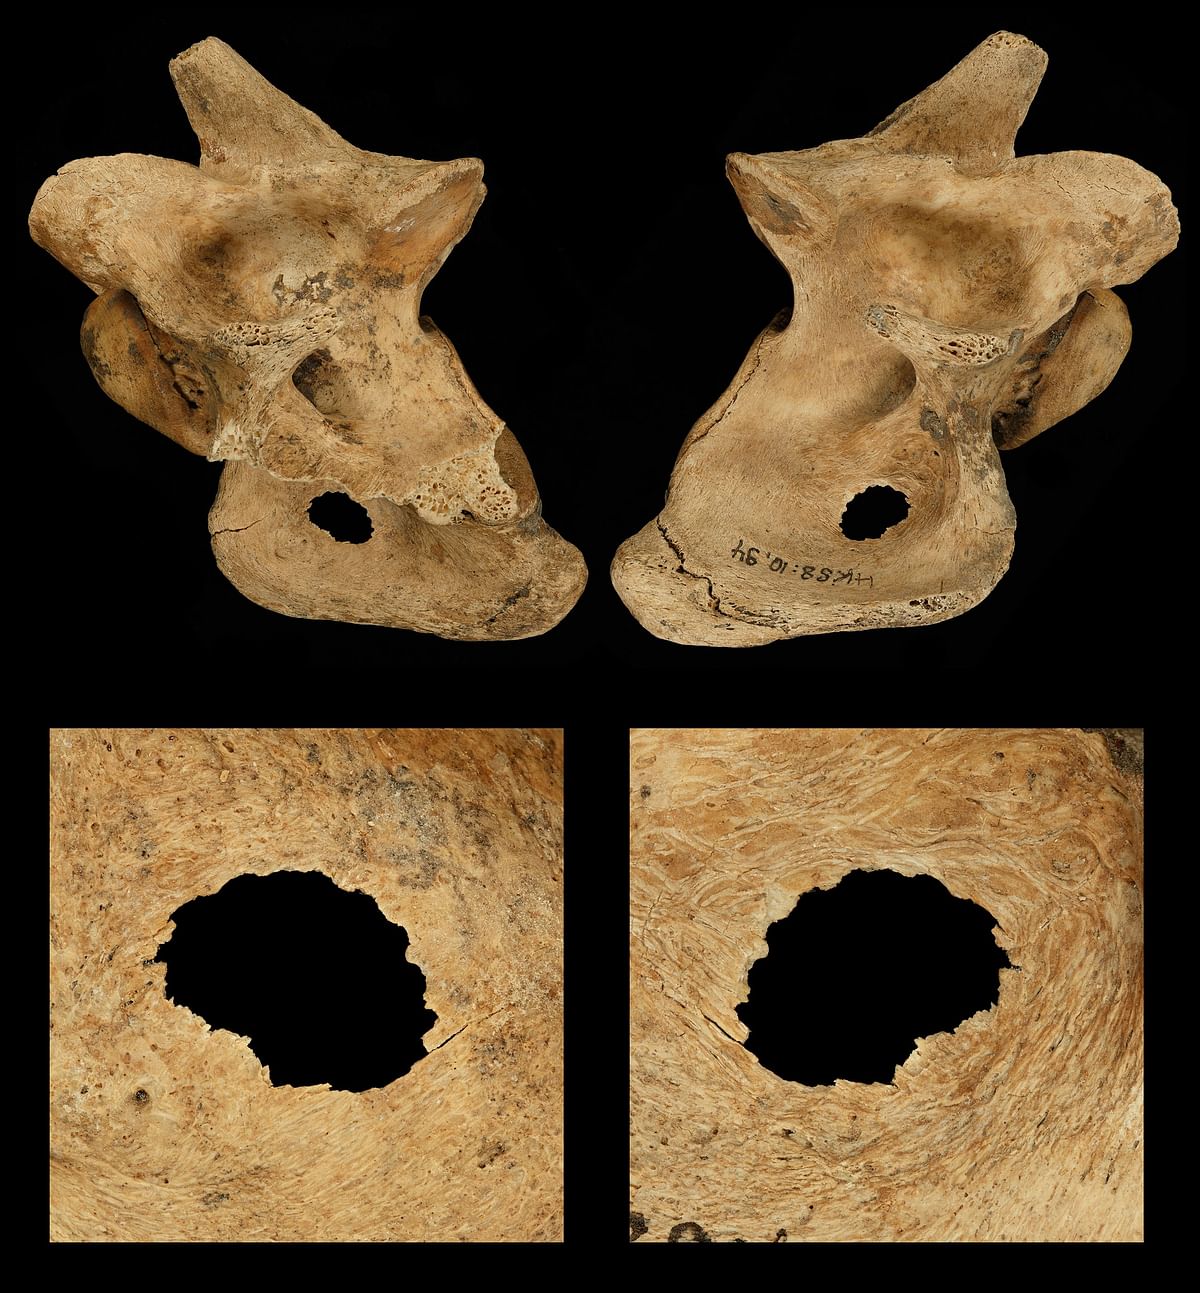 A handout photo released on 25 June 2018 by Nature shows a front and back view of a hunting lesion in the pelvis of an extinct fallow deer, killed by Neandertals 120,000 years ago on a lake shore close to current-day Halle, Germany. Photo: AFP